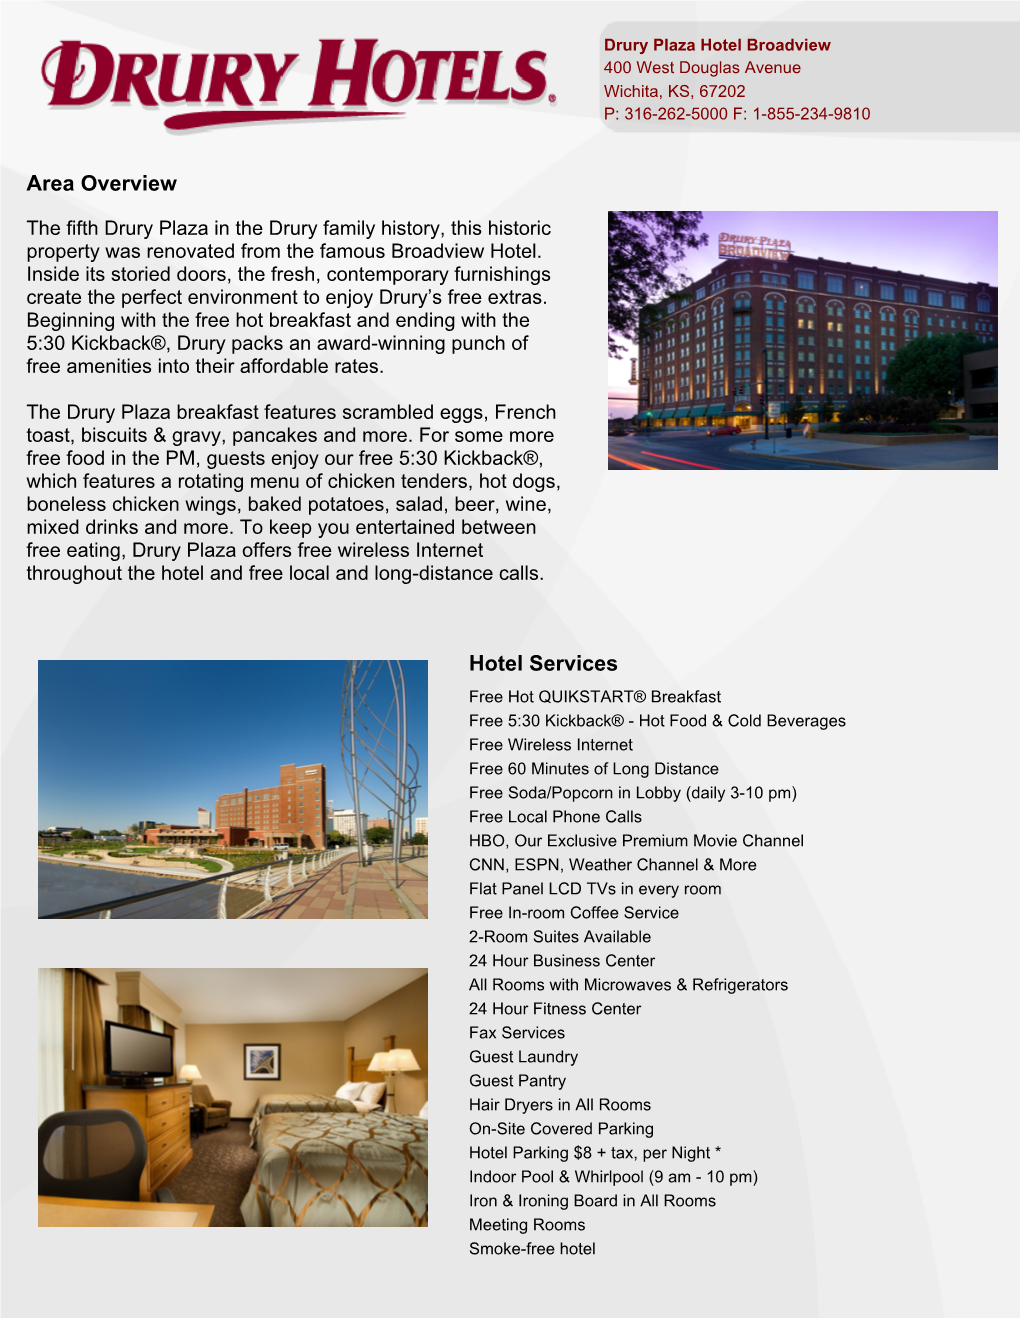 Area Overview Hotel Services